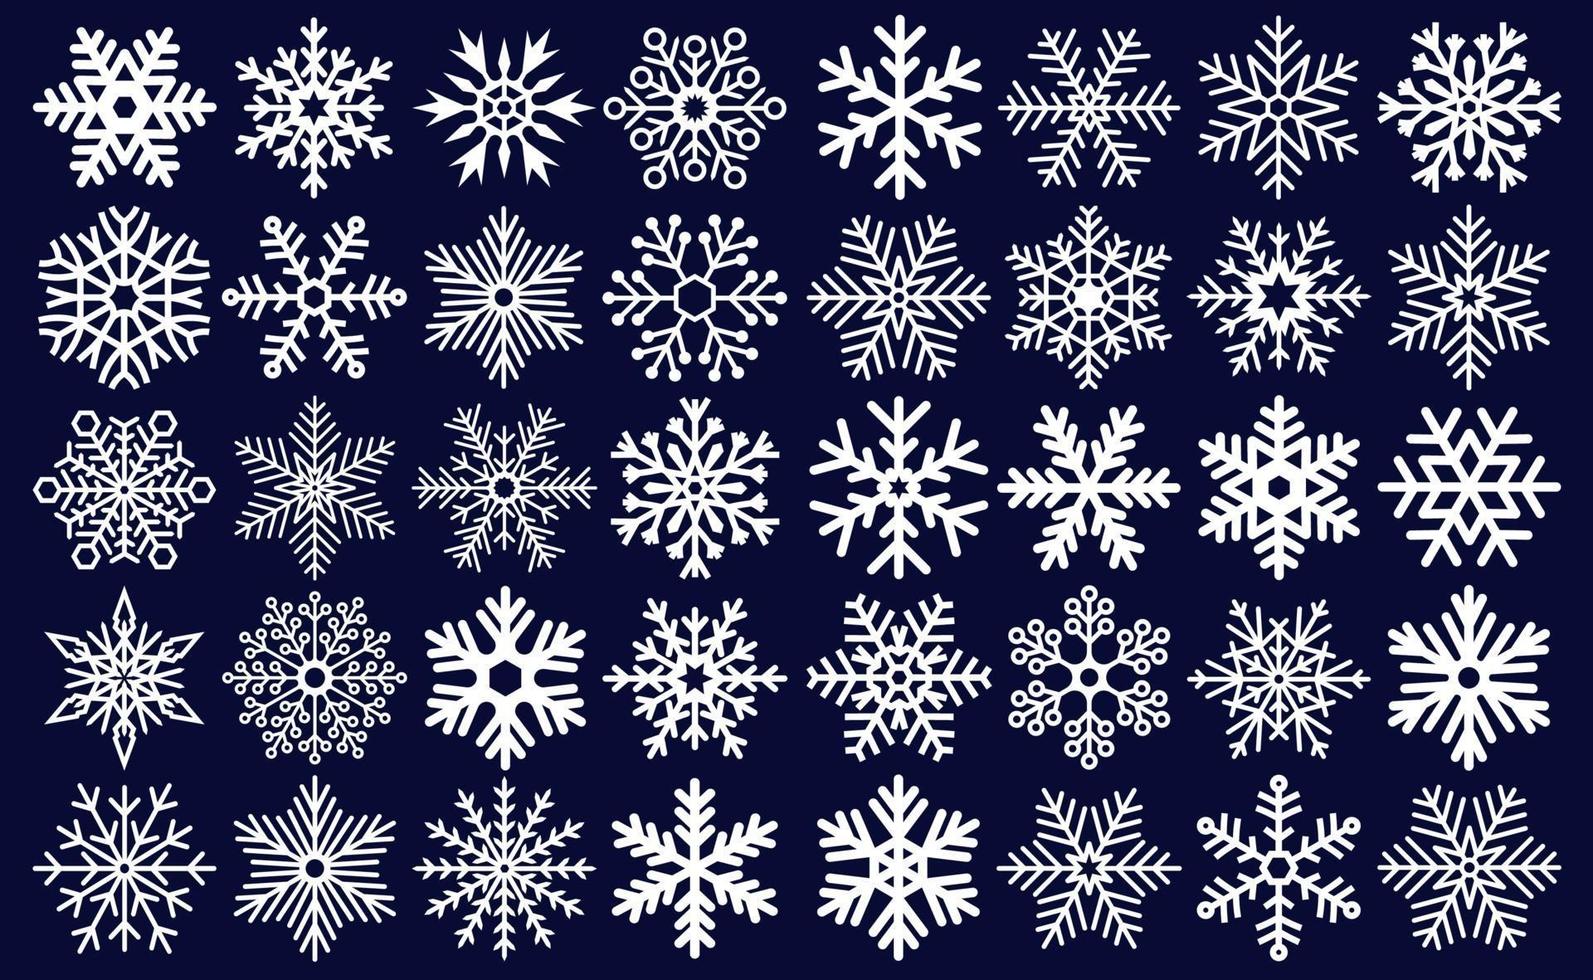 Icon collection of many different snowflakes - Vector illustration